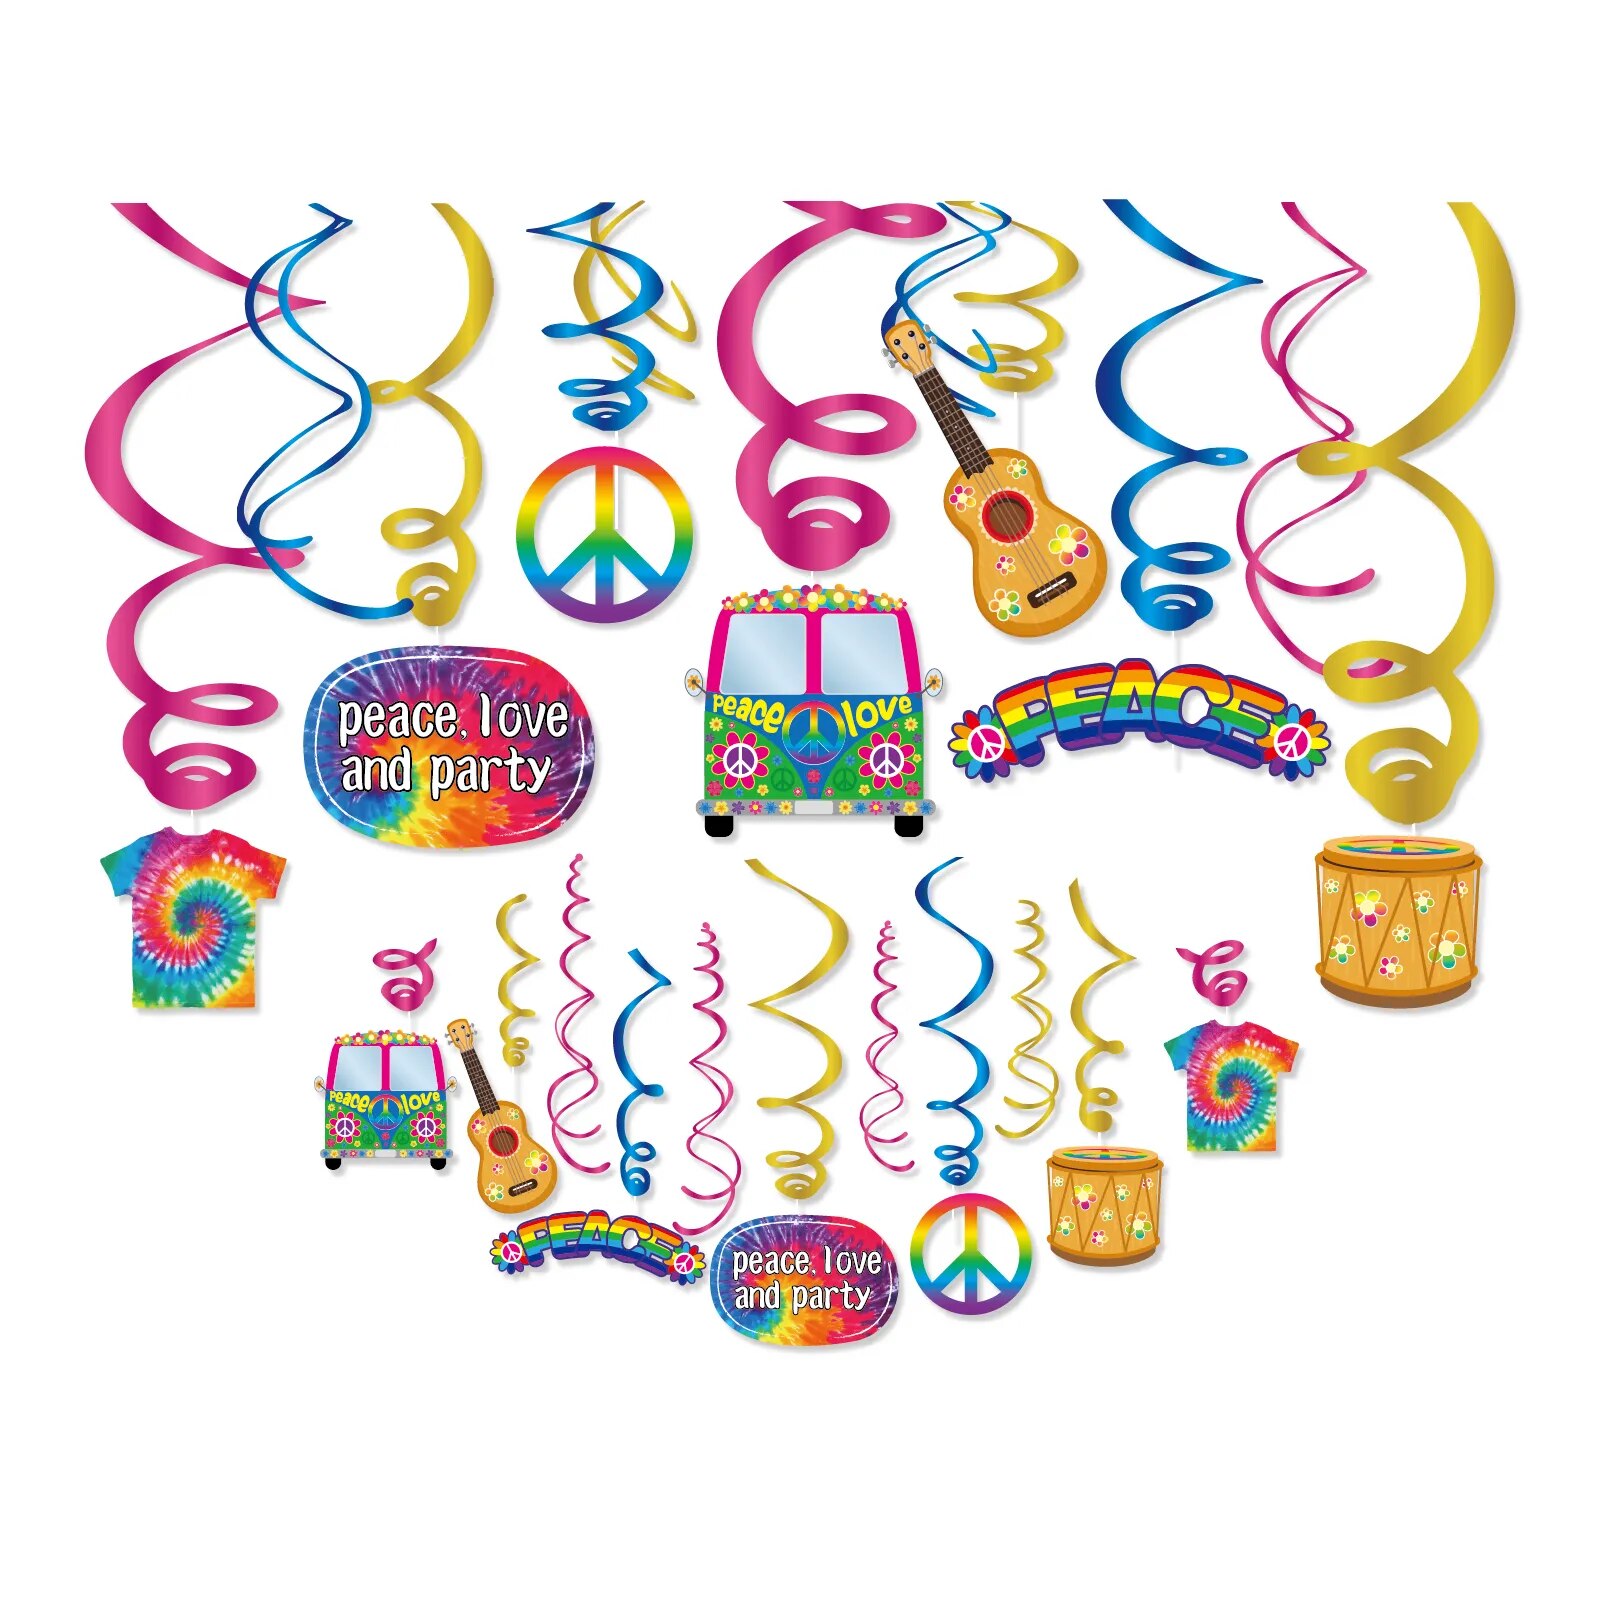 JOYMEMO 60's Hippie Theme Party Decorations, 1960s Groovy Photo Backdrop,  Tie Dye Balloons Garland Arch Kit for Retro 60s, Peace and Love Decor